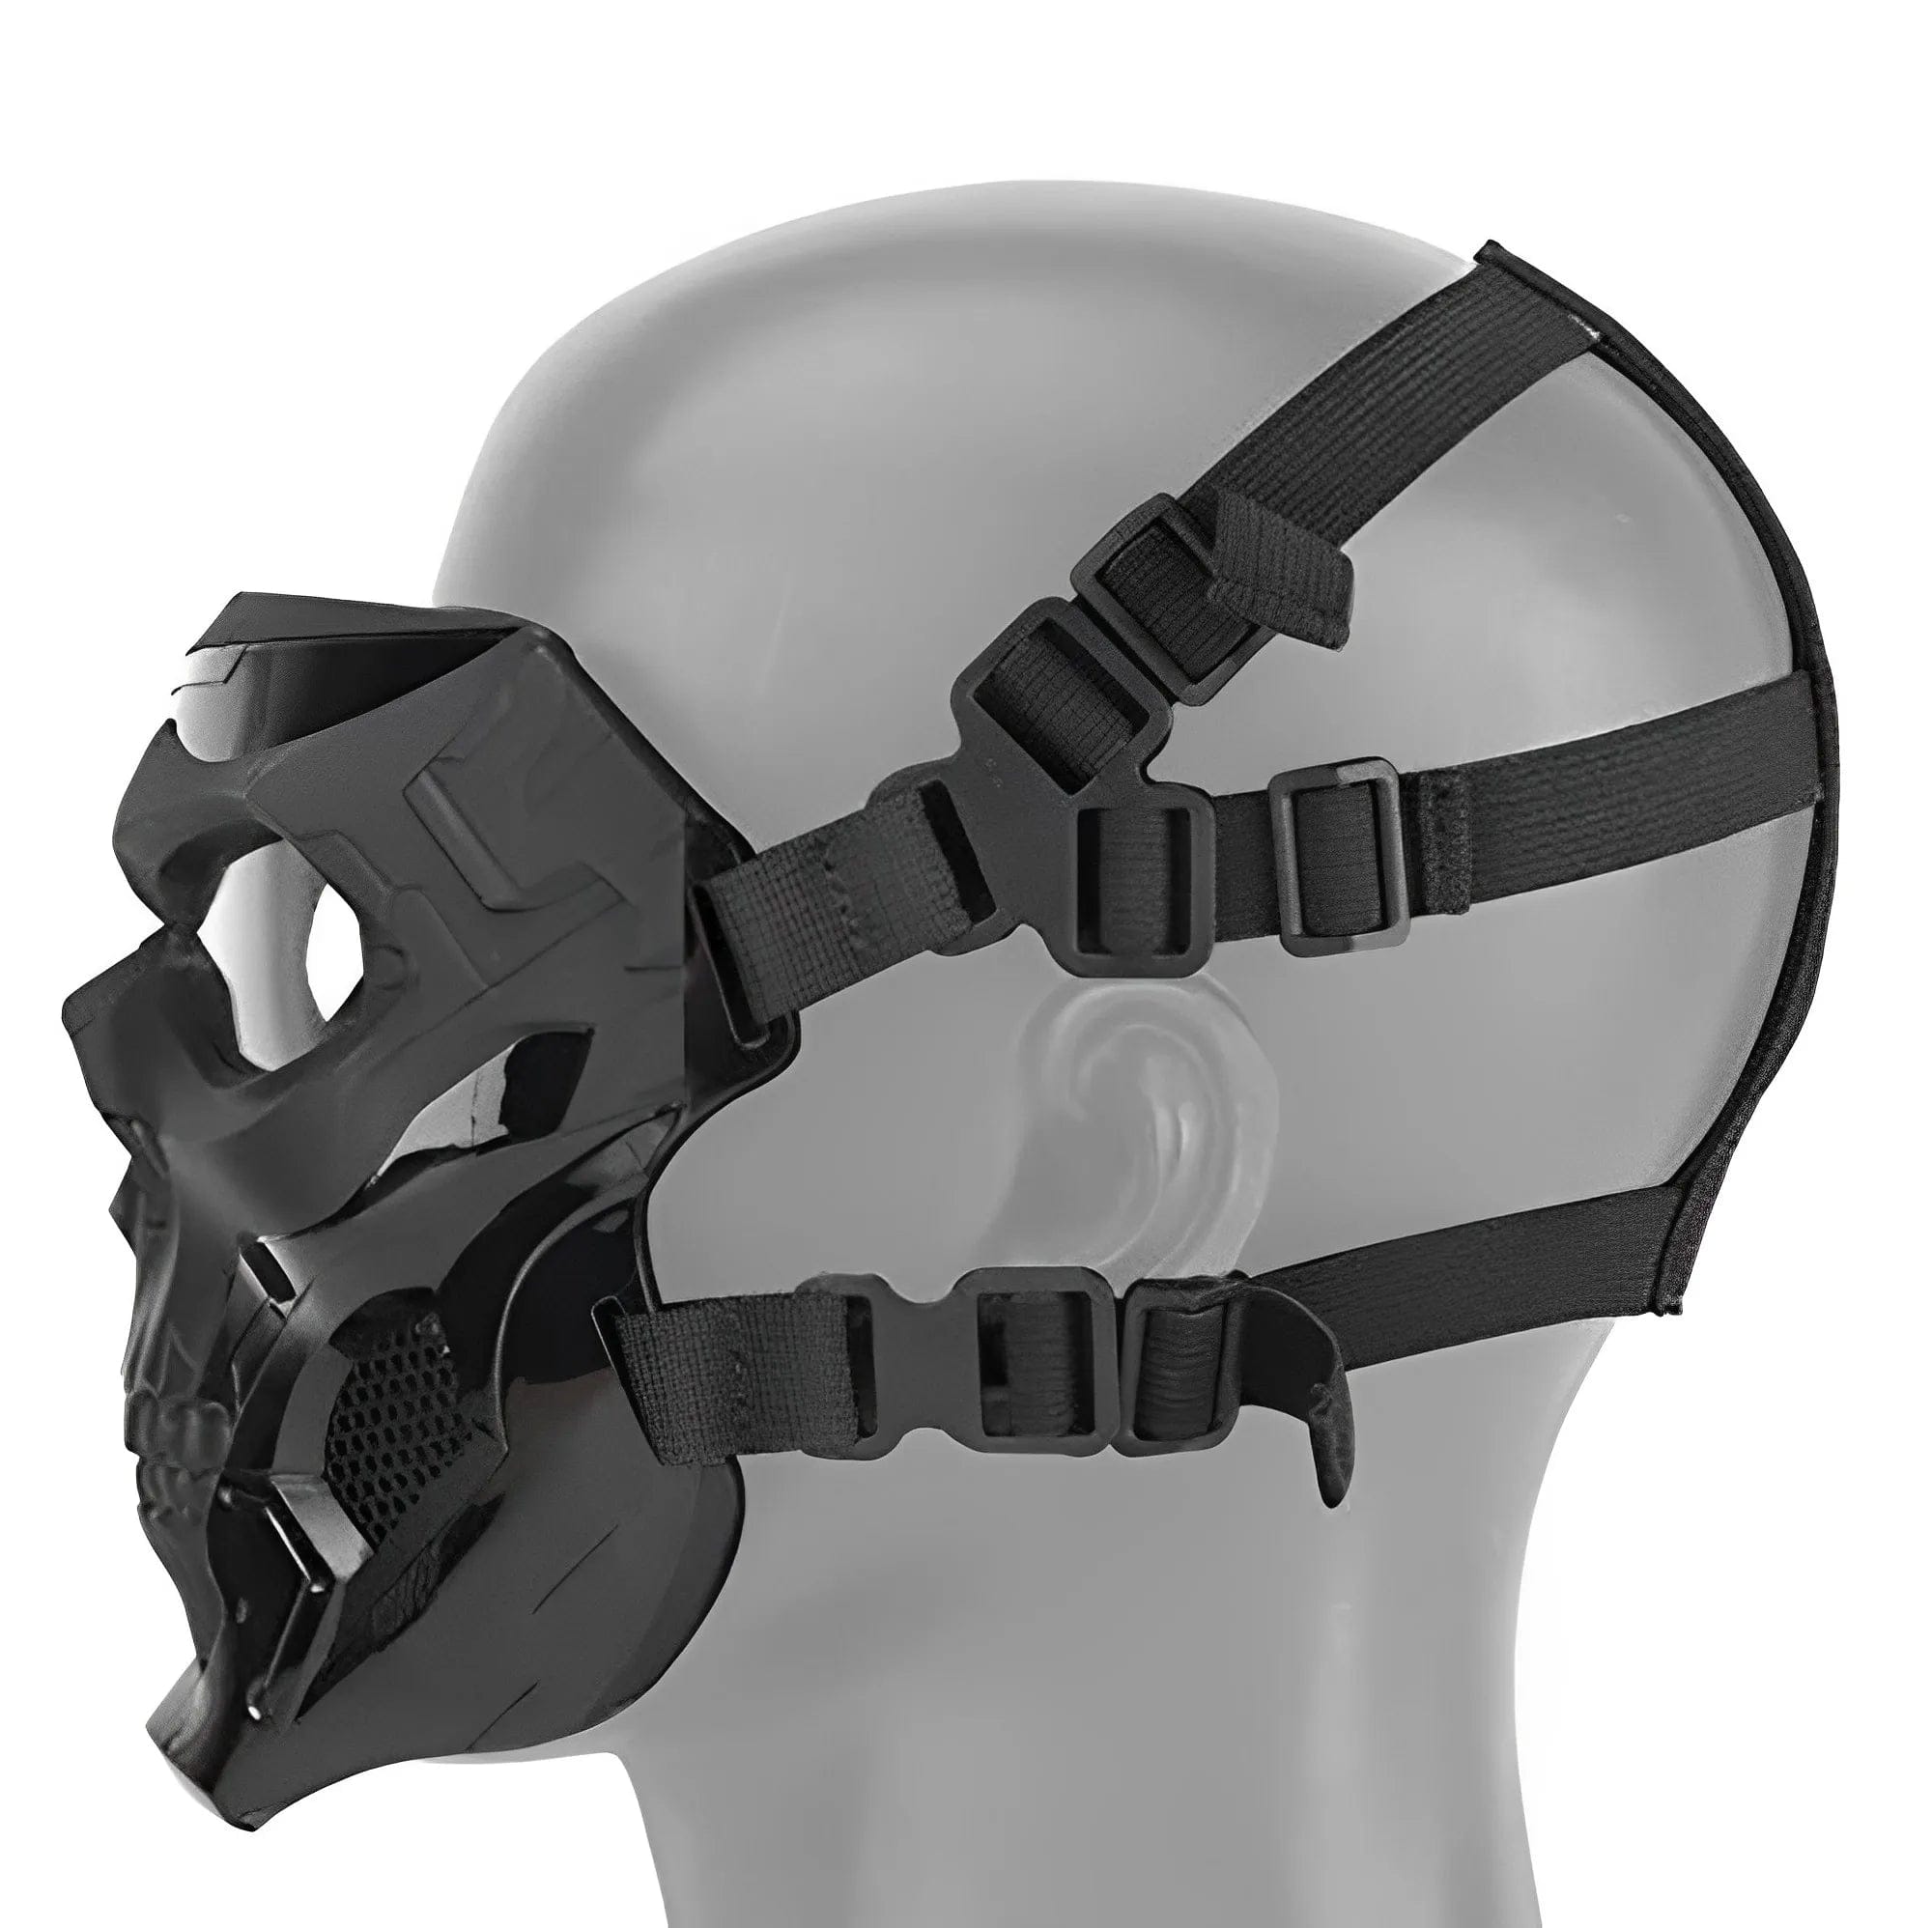 Full protective mask with helmet / paintball, airsoft mask